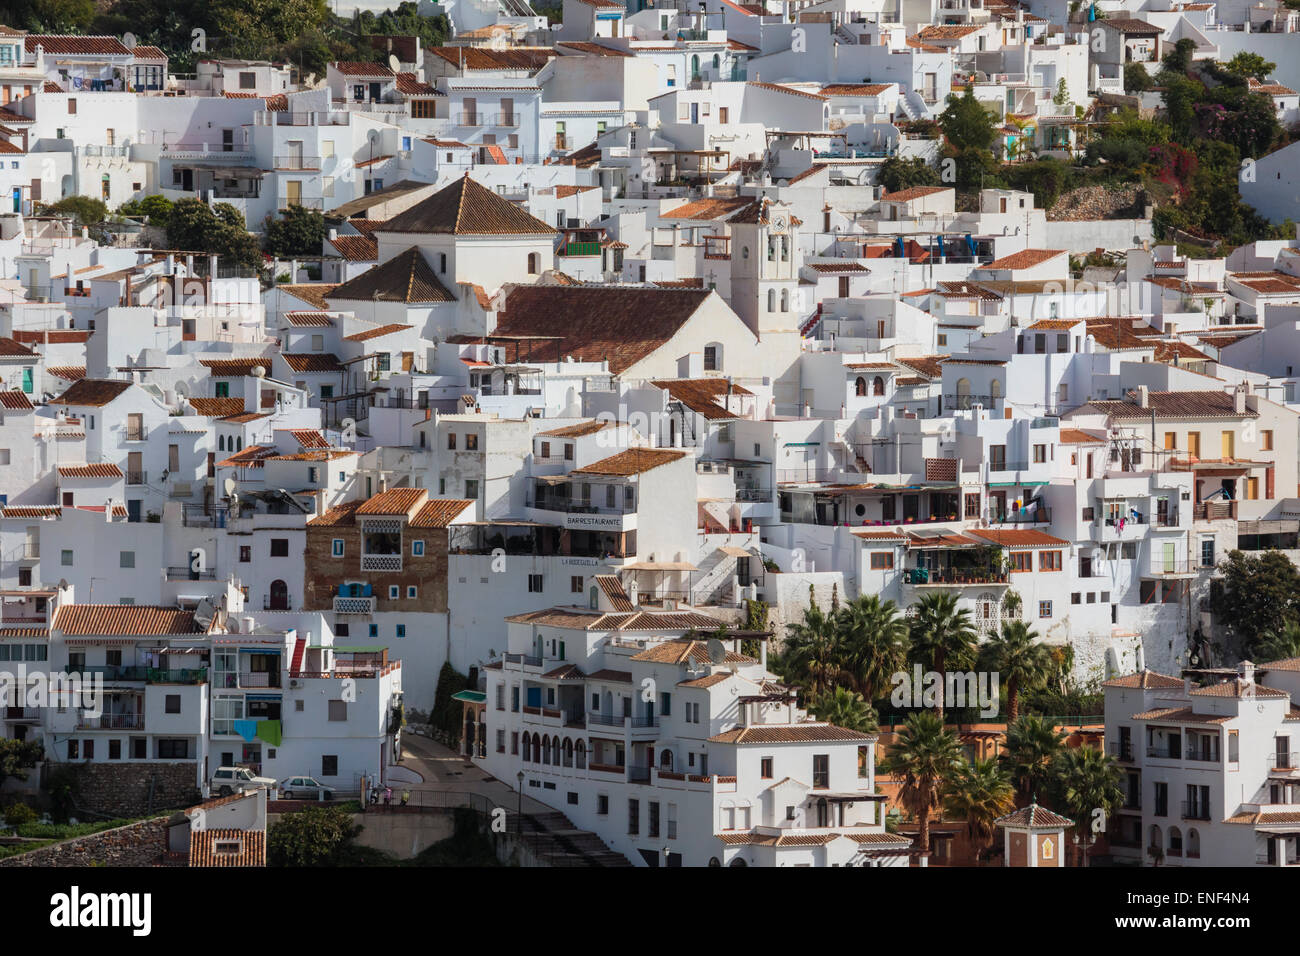 Frigiliana, Malaga Province, Axarquia, Andalusia, southern Spain. Typical white washed mountain town. Stock Photo